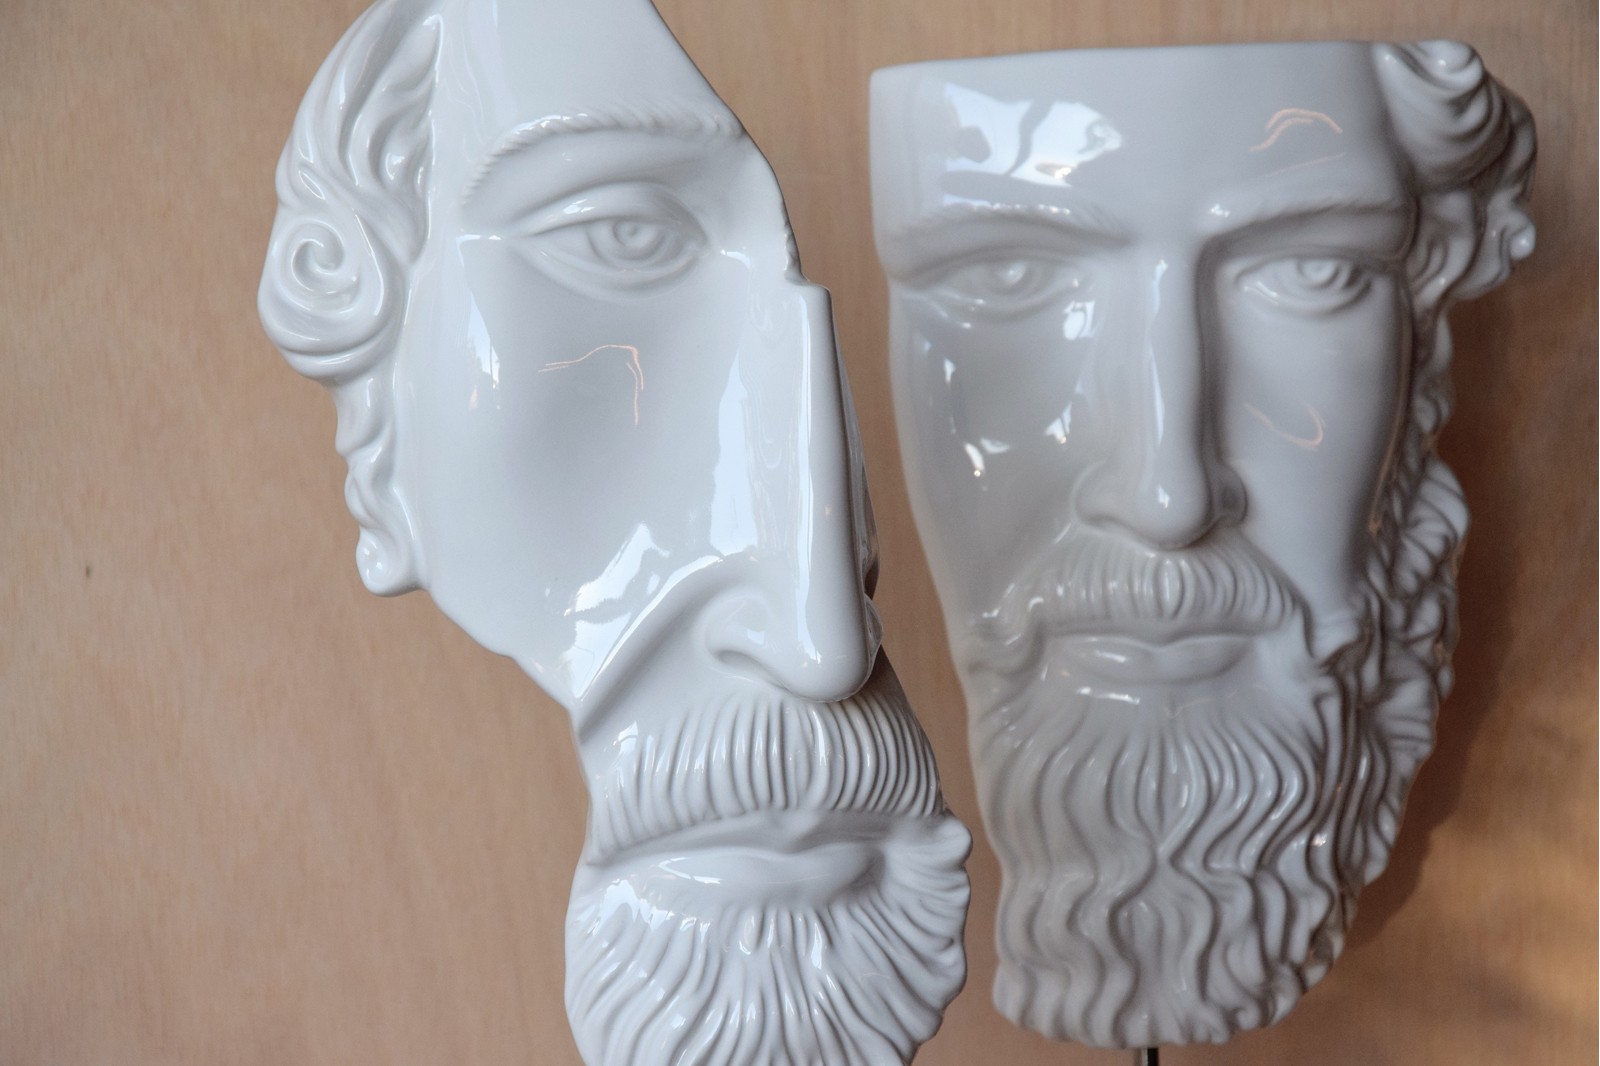 CLASSIC SCULPTURE COLLECTION. GLOSS WHITE CERAMIC FACES